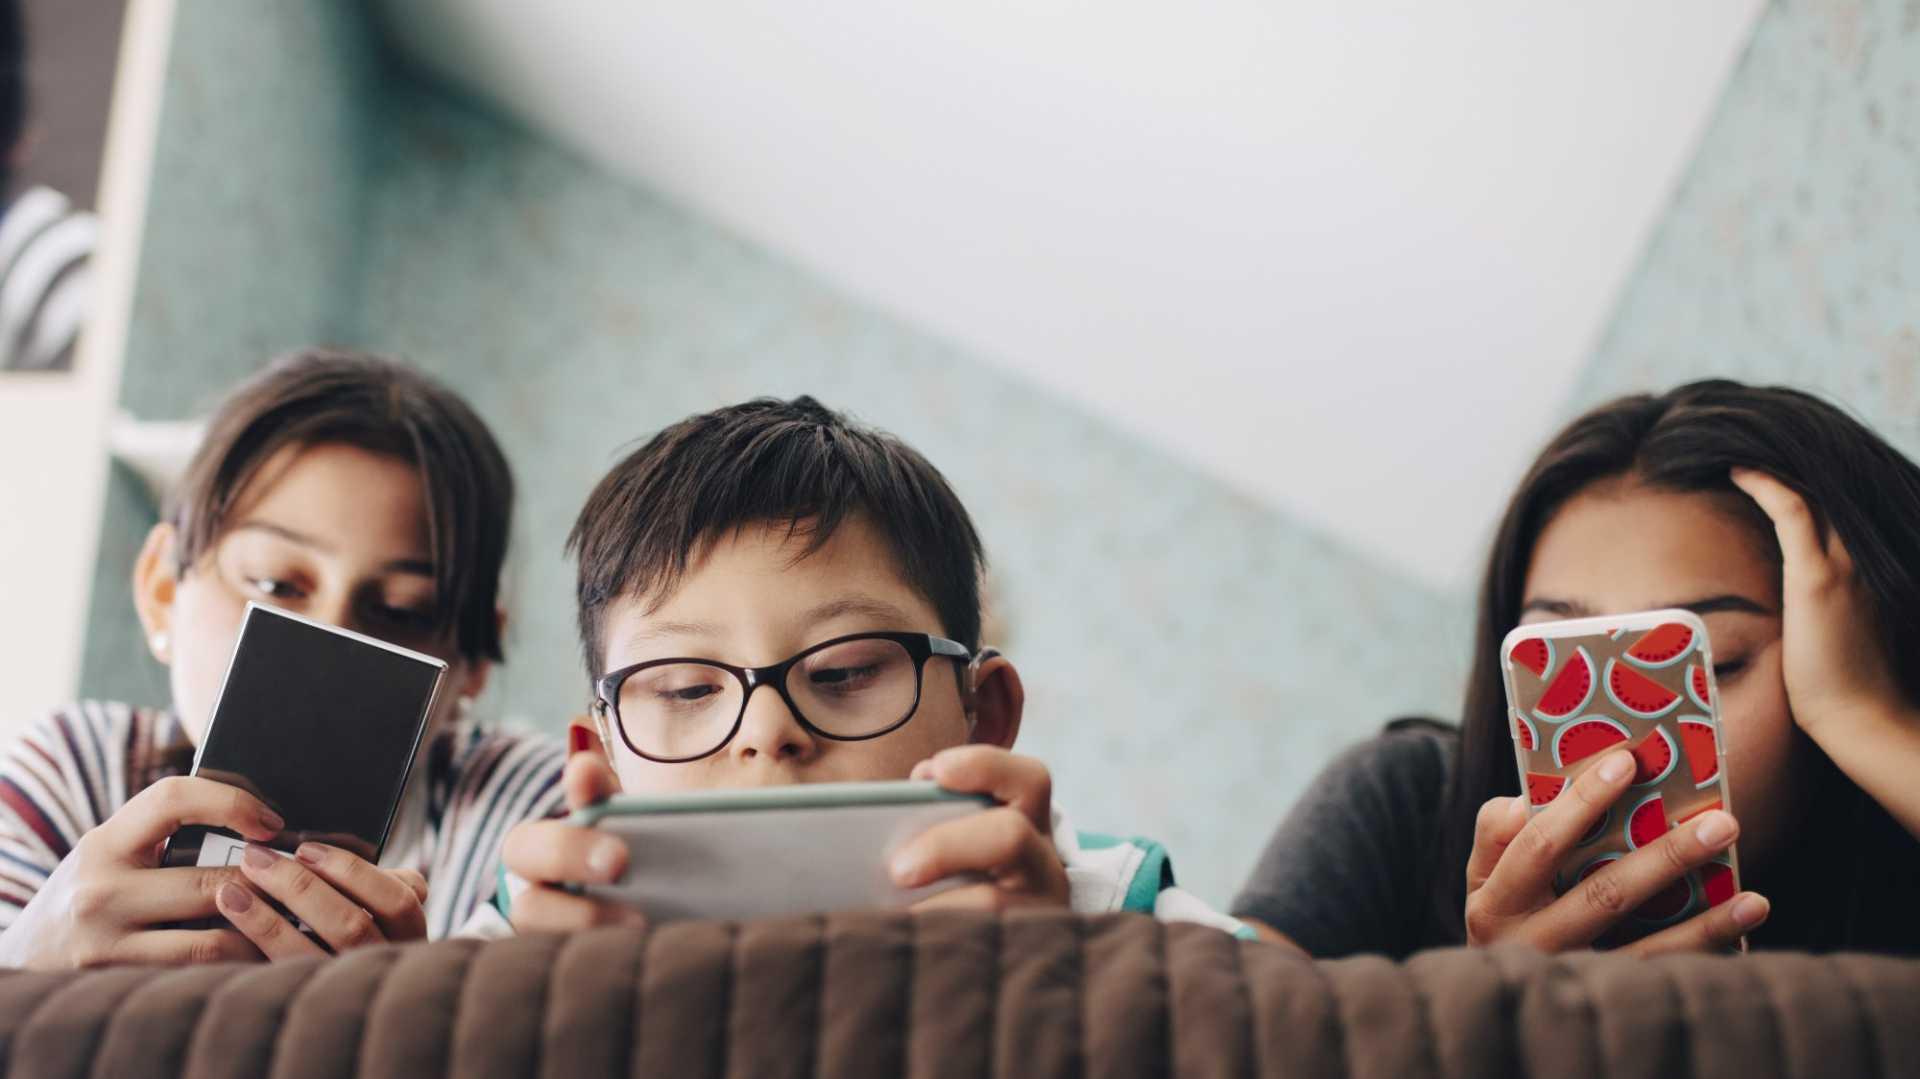 The Danger Of Too Much Screen Time For Teens